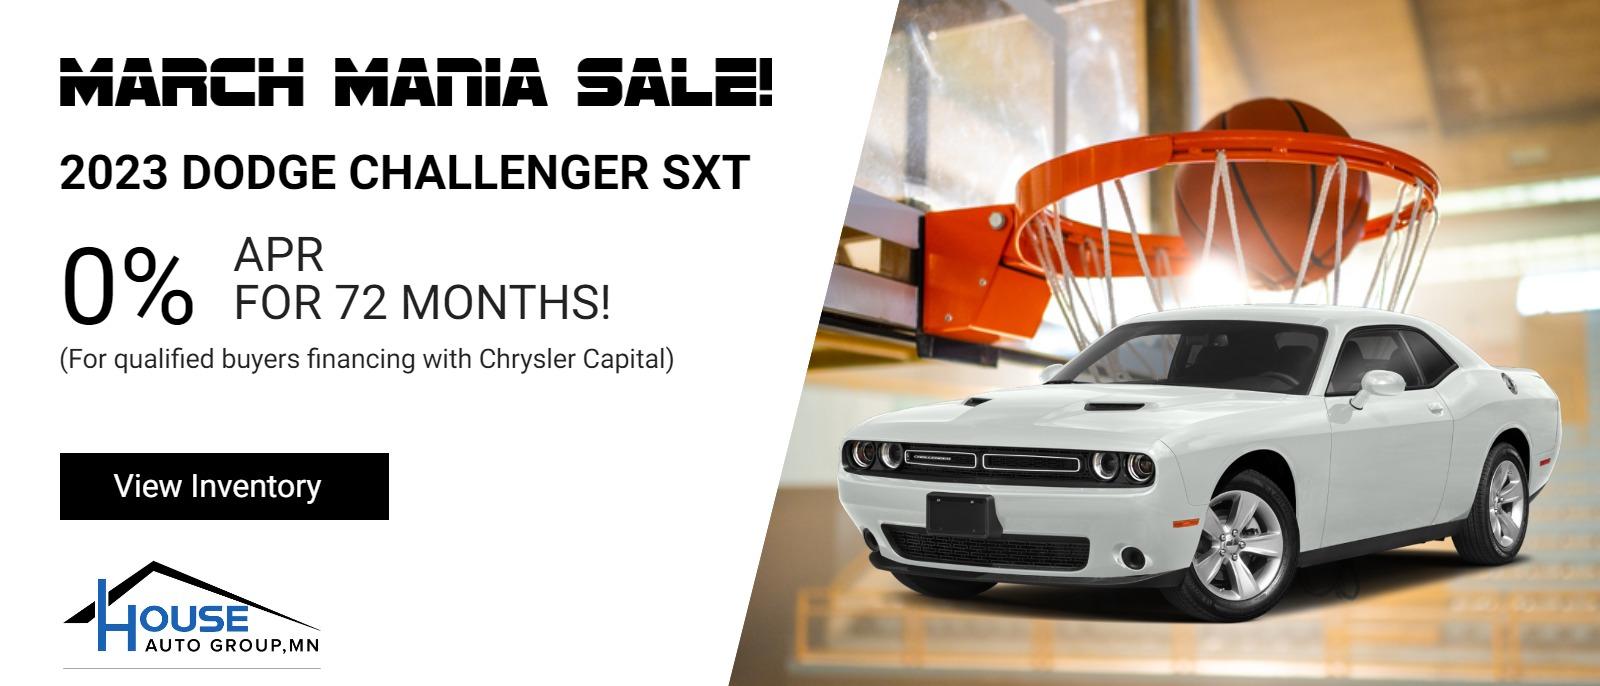 2023 Dodge Challenger SXT - 0% APR for 72 Months! (For qualified buyers financing with Chrysler Capital).